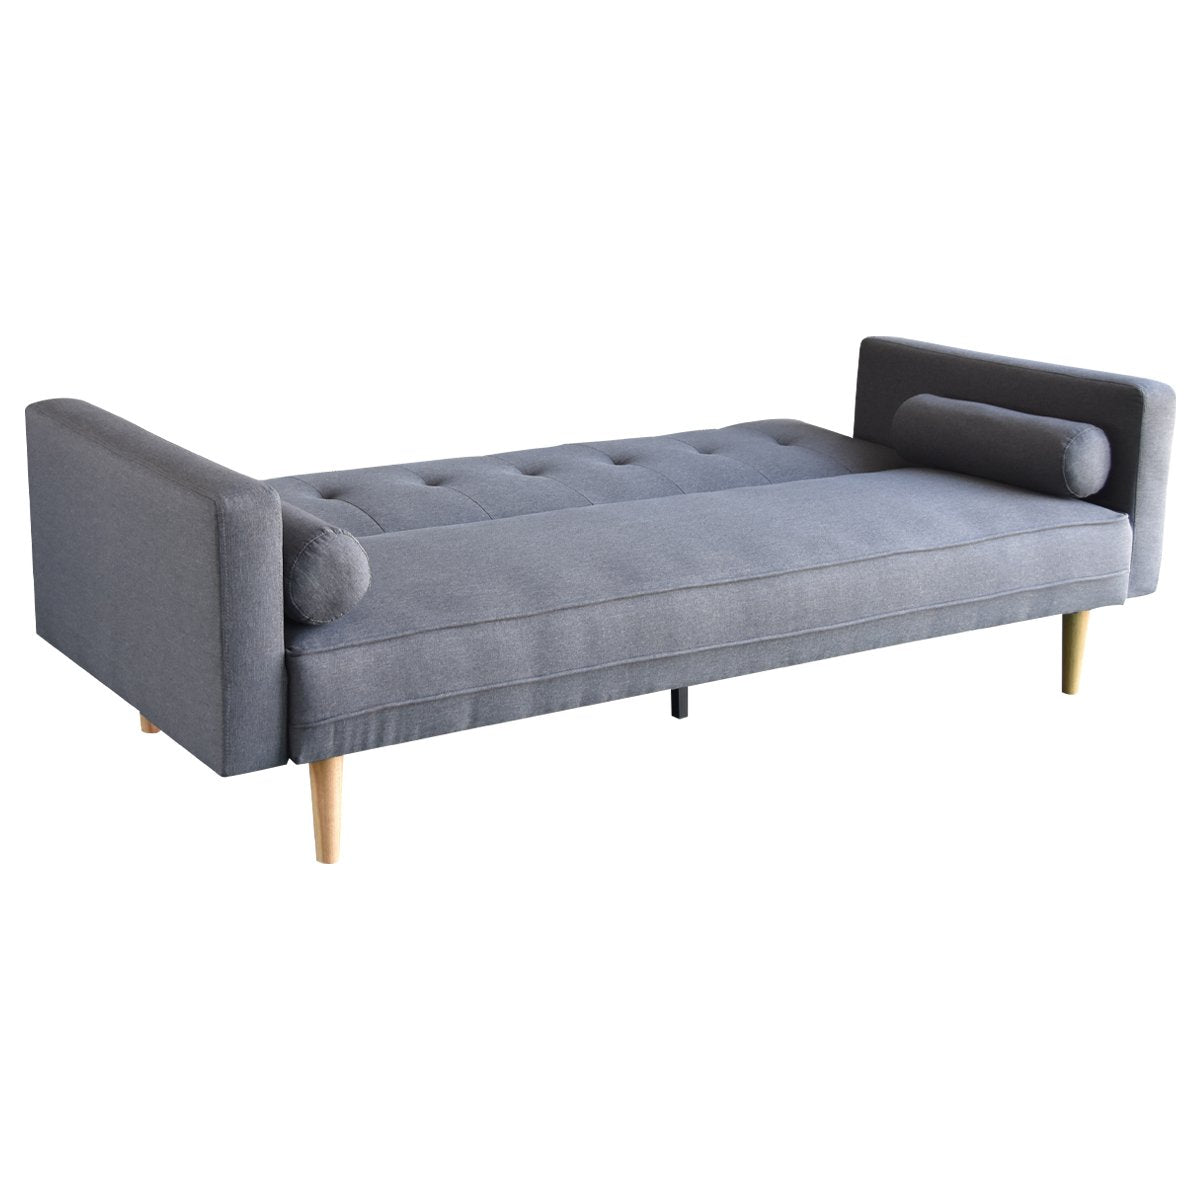 Sarantino 3 Seater Linen Sofa Bed Couch with Pillows - Dark Grey